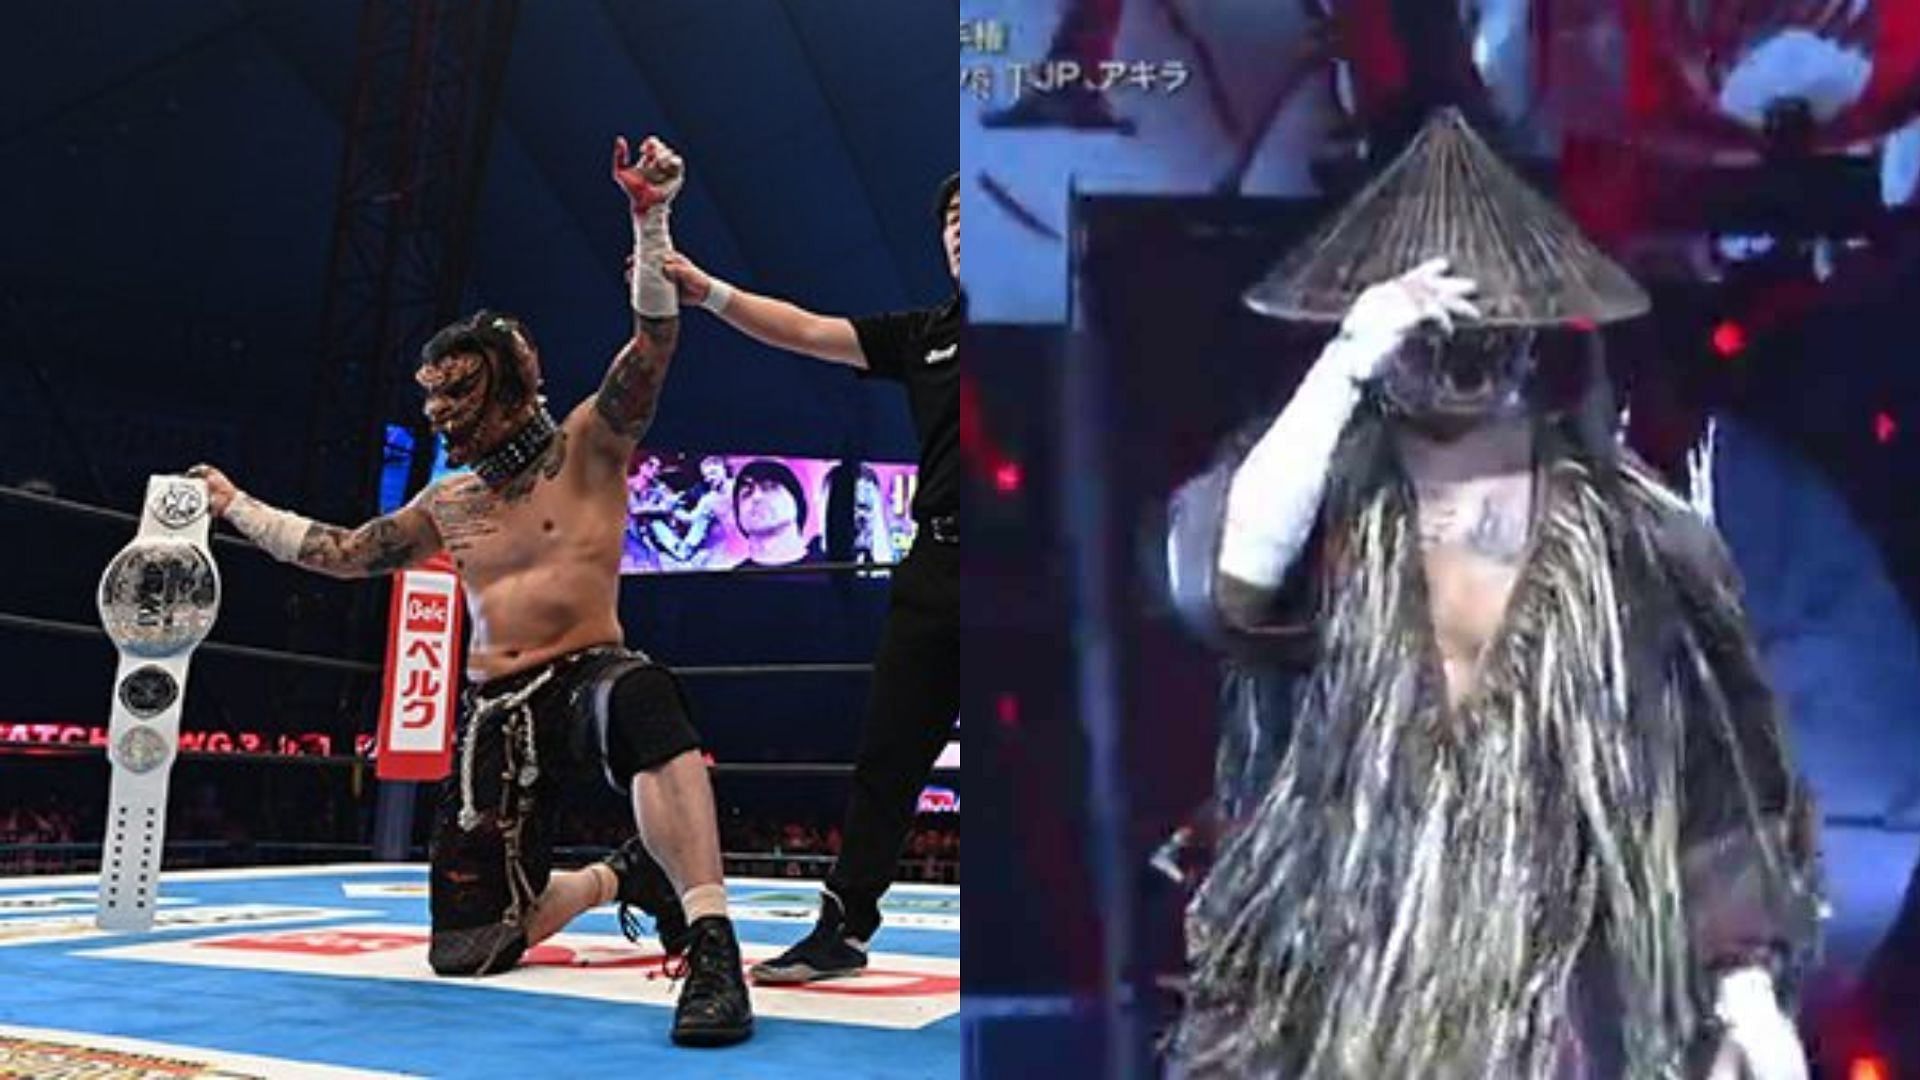 A former WWE Superstar introduced a brand new character at the Tokyo Dome (Photo Credits: NJPW World/Wrestle Kingdom 18)